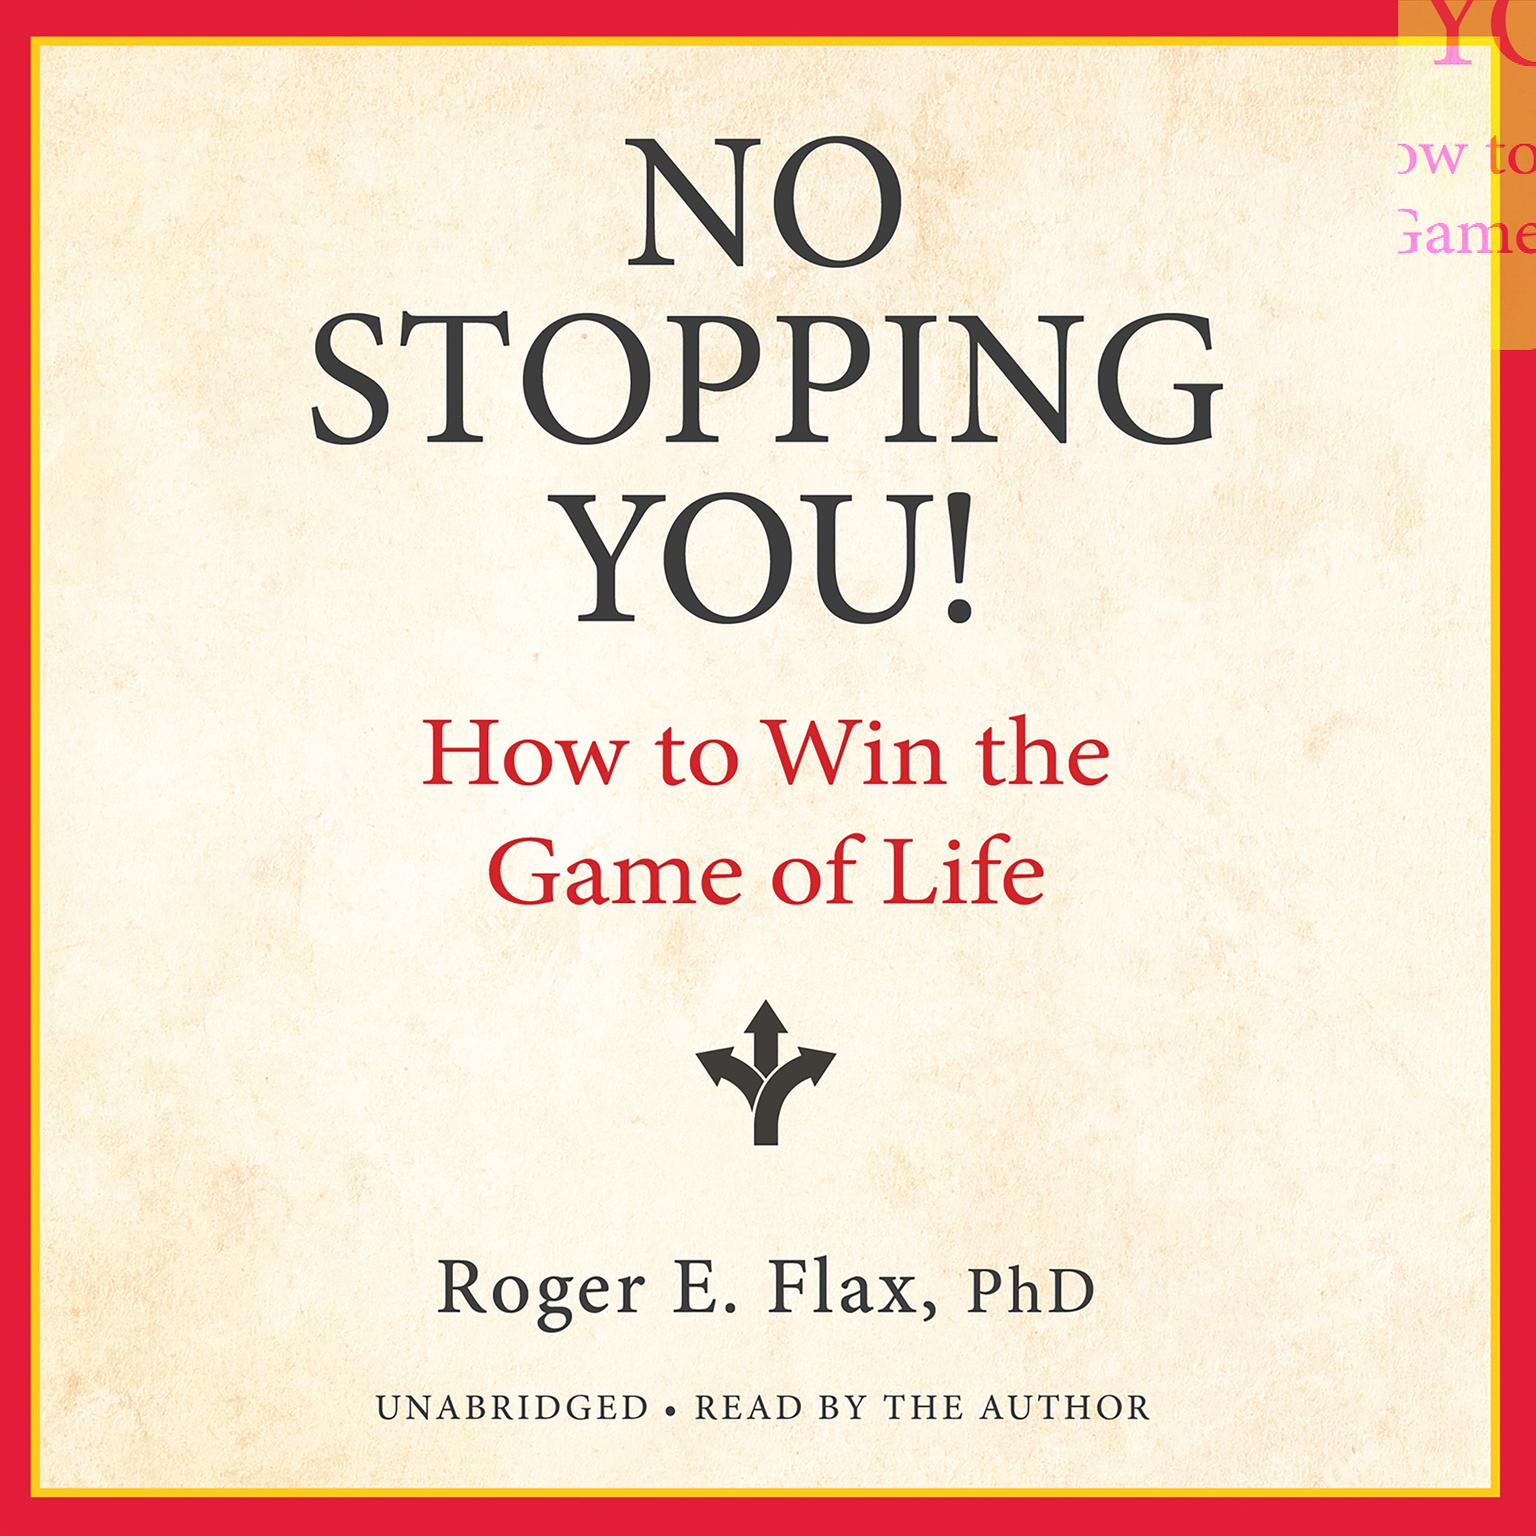 No Stopping You!: How to Win the Game of Life Audiobook, by Roger E. Flax